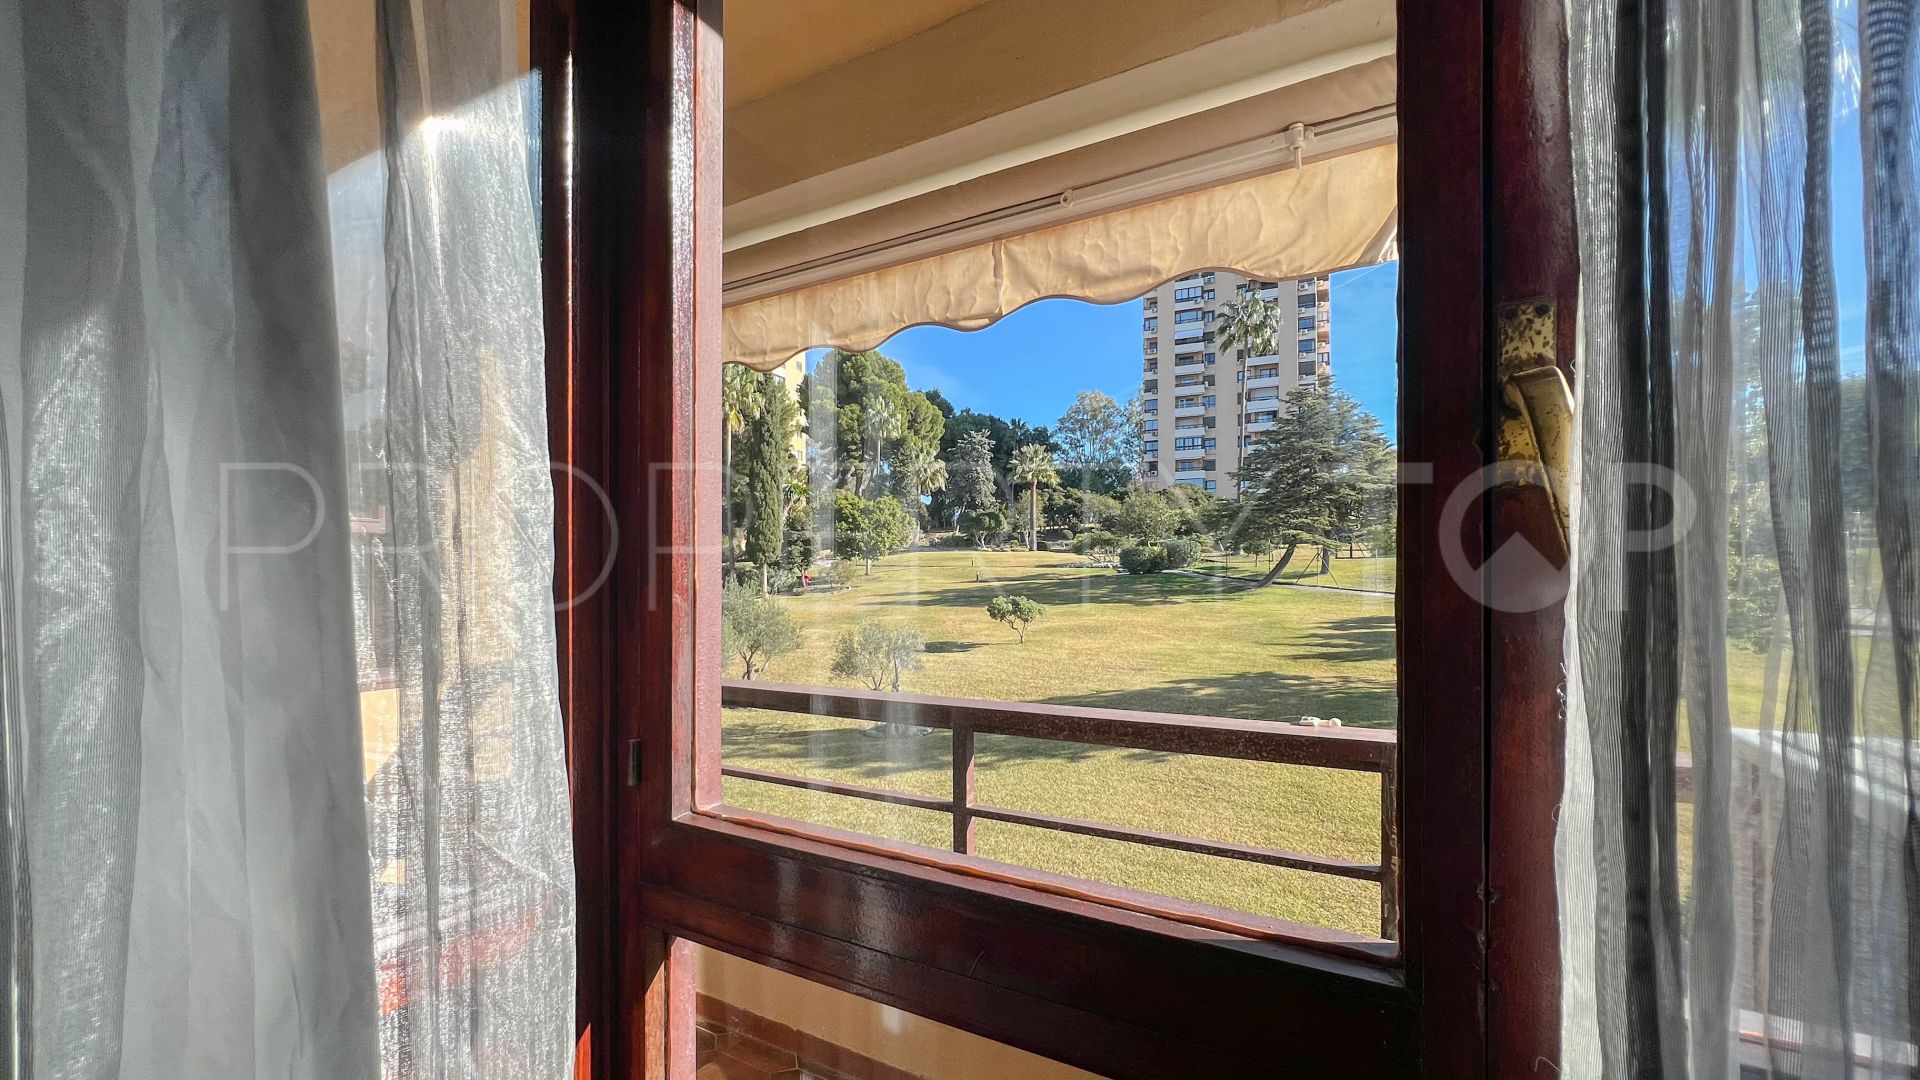 For sale apartment in Torres de Aloha with 1 bedroom